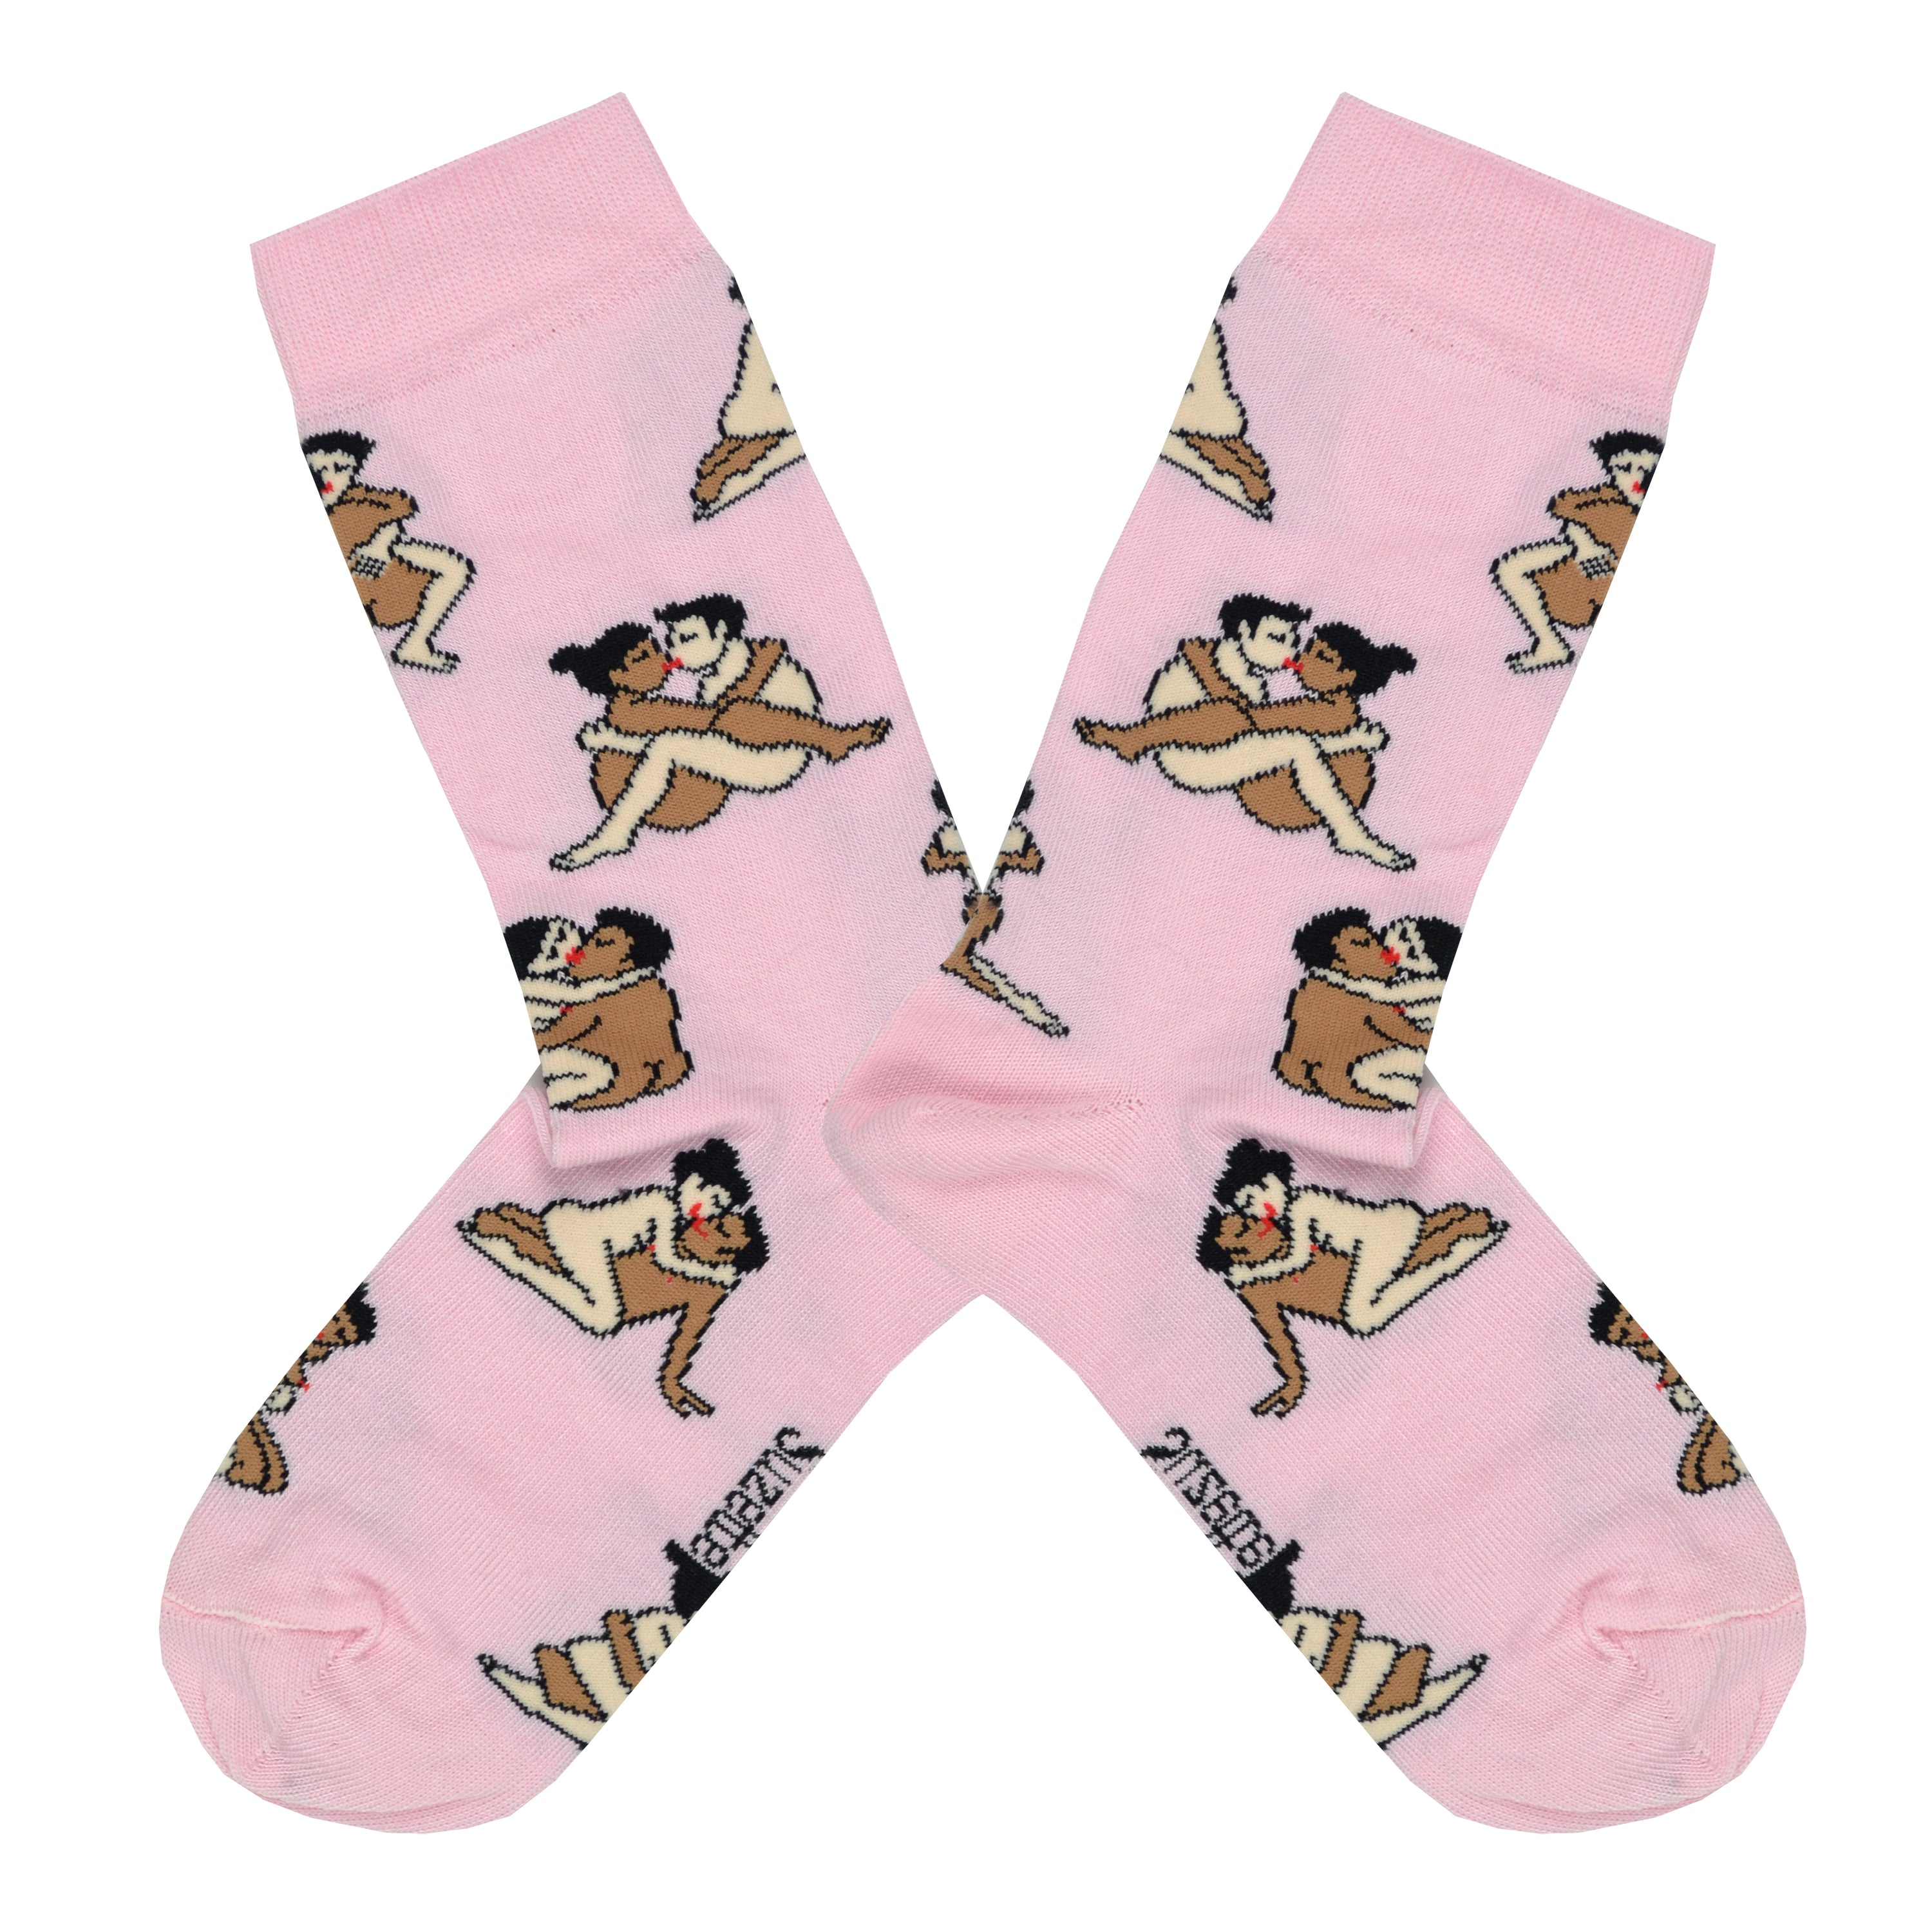 Shown in a flatlay, a pair of light pink socks that show an interracial straight couple in various sexual positions from the Kama Sutra all over the sock. 